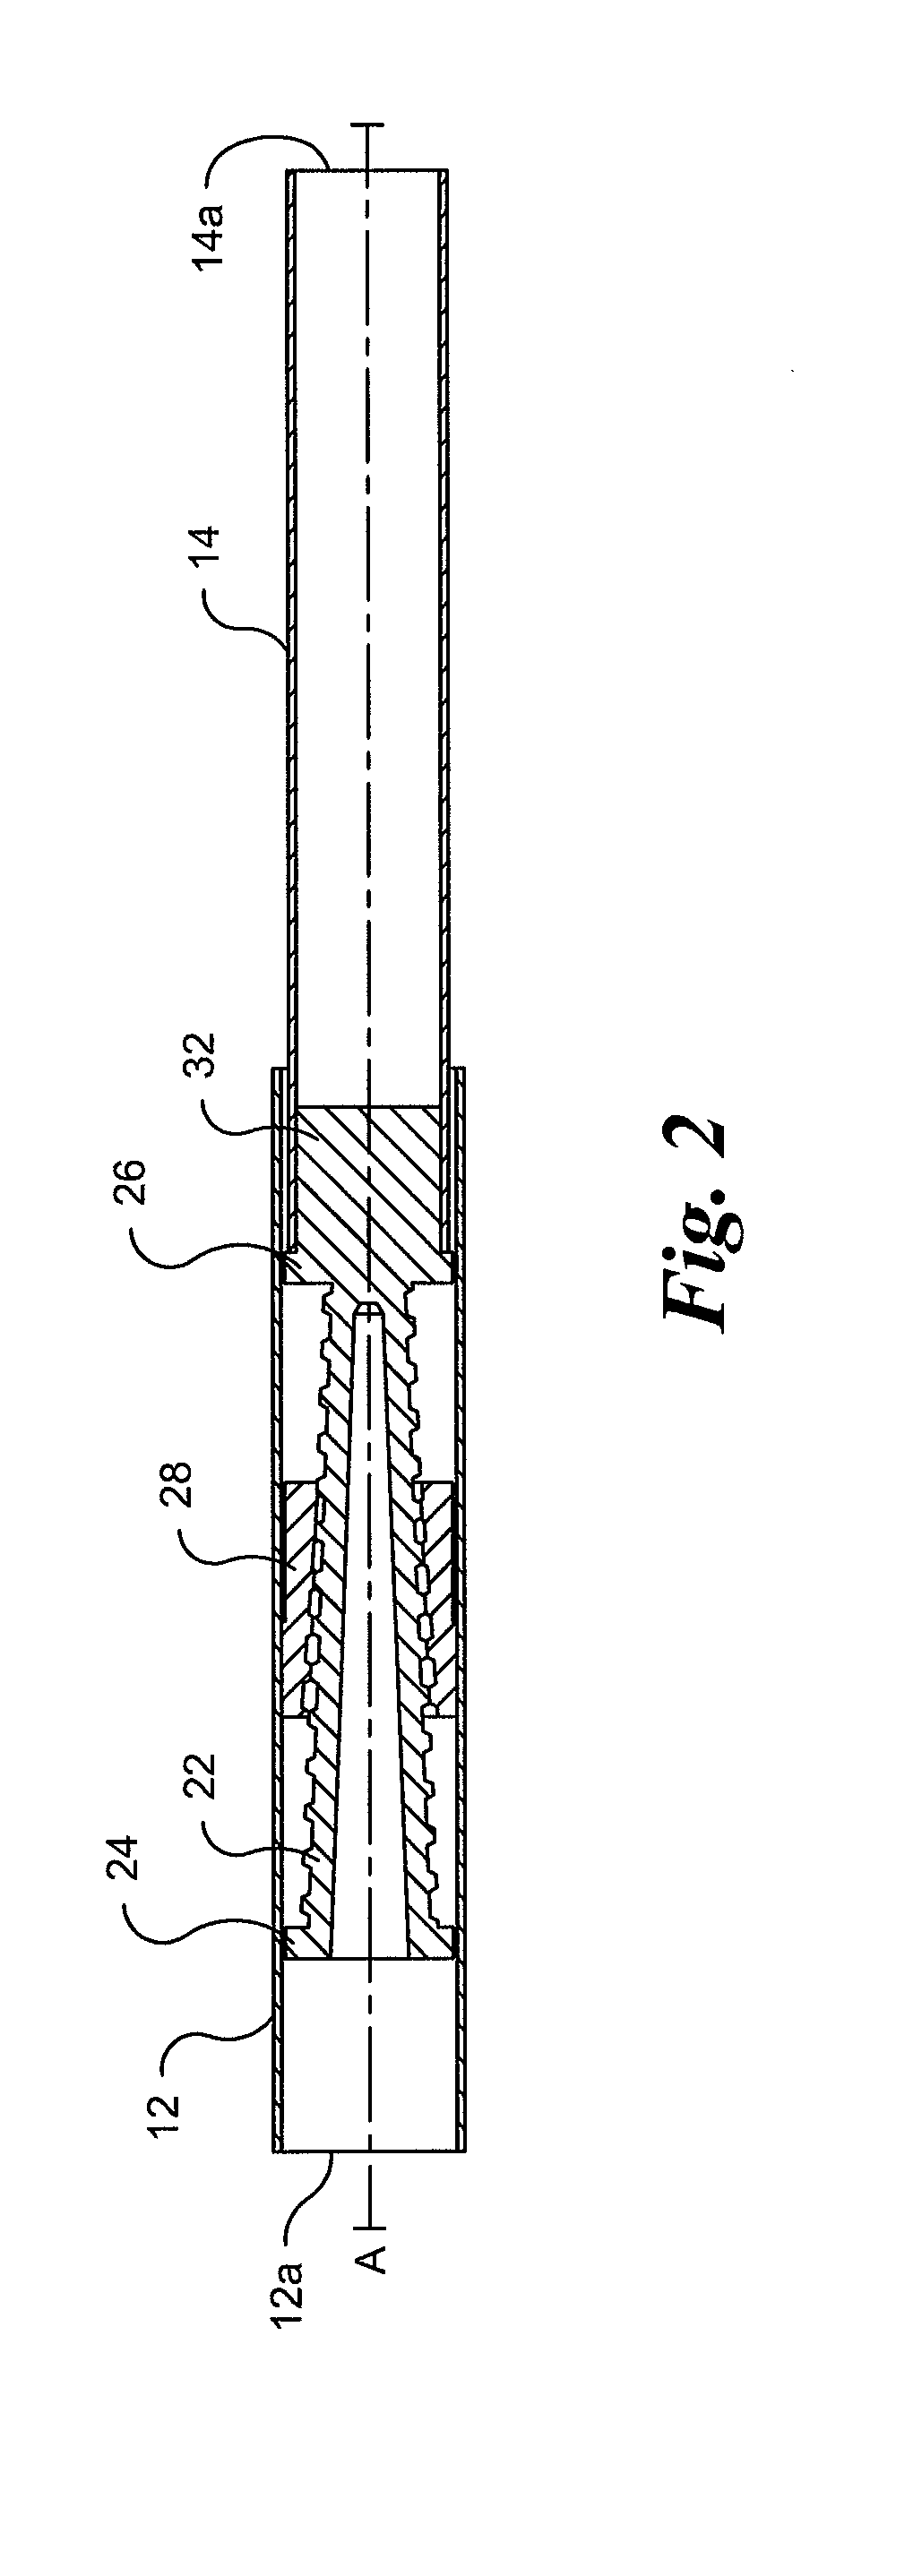 Molded tension rod mechanism with single lock nut